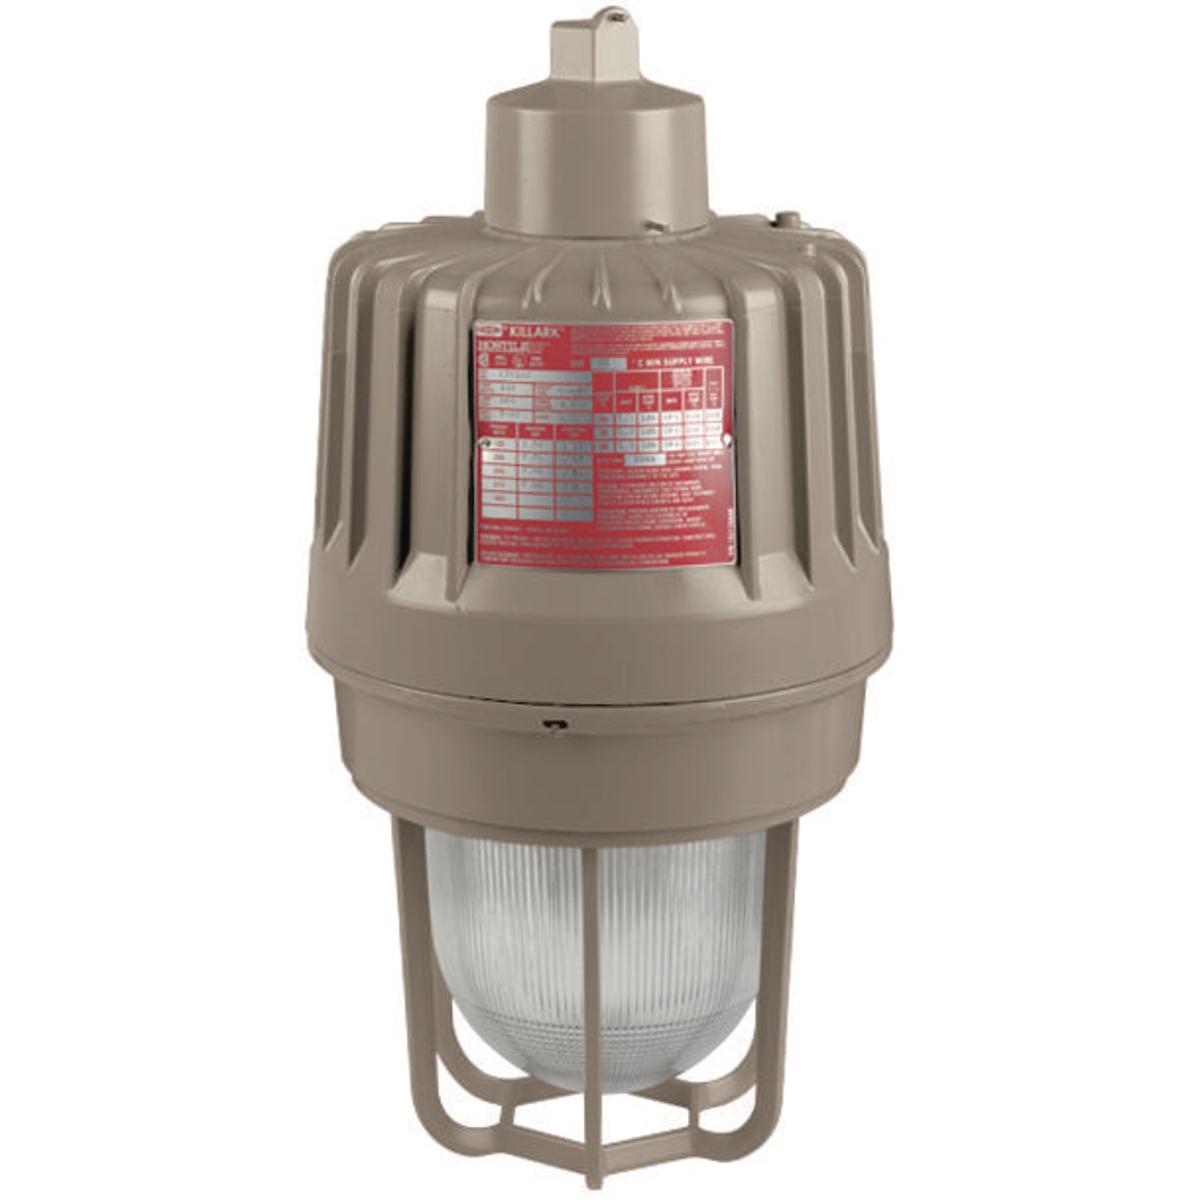 Hubbell EZS075A2 70W 480V High Pressure Sodium 3/4" Pendant  ; Three light sources – High Pressure Sodium (50-400W), Metal Halide (70-400W) and Pulse Start Metal Halide (175-400W) ; Mounting choice –Pendant, ceiling, 25˚ stanchion or 90˚ wall mount, all with “wireless” de